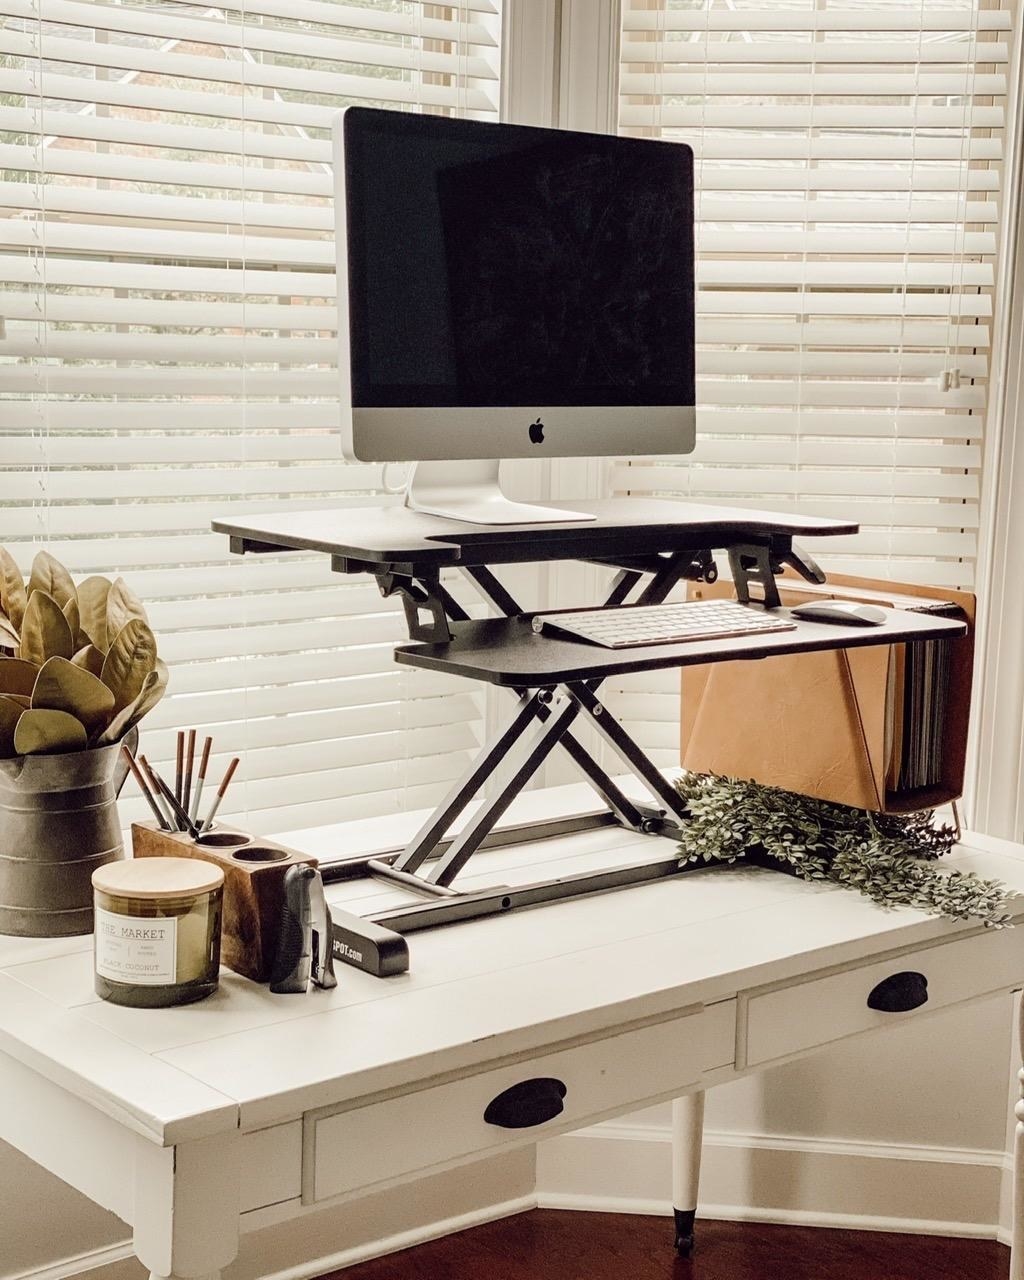 the two-tiered standing desk